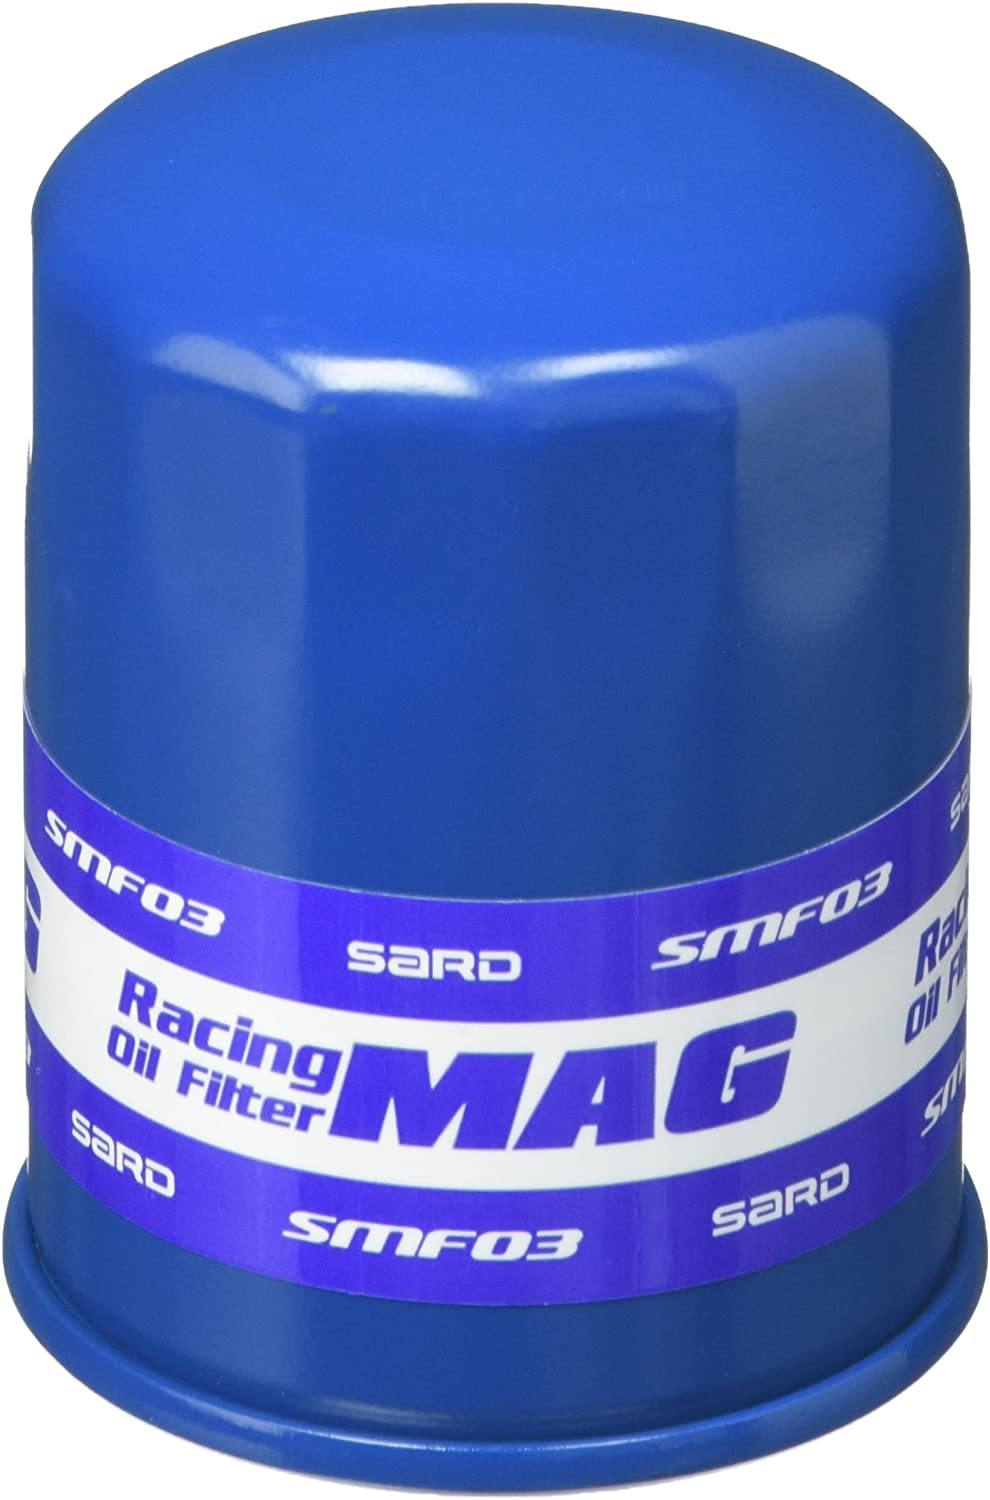 SARD RACING OIL FILTER For STORIA M100S M110S SMF00